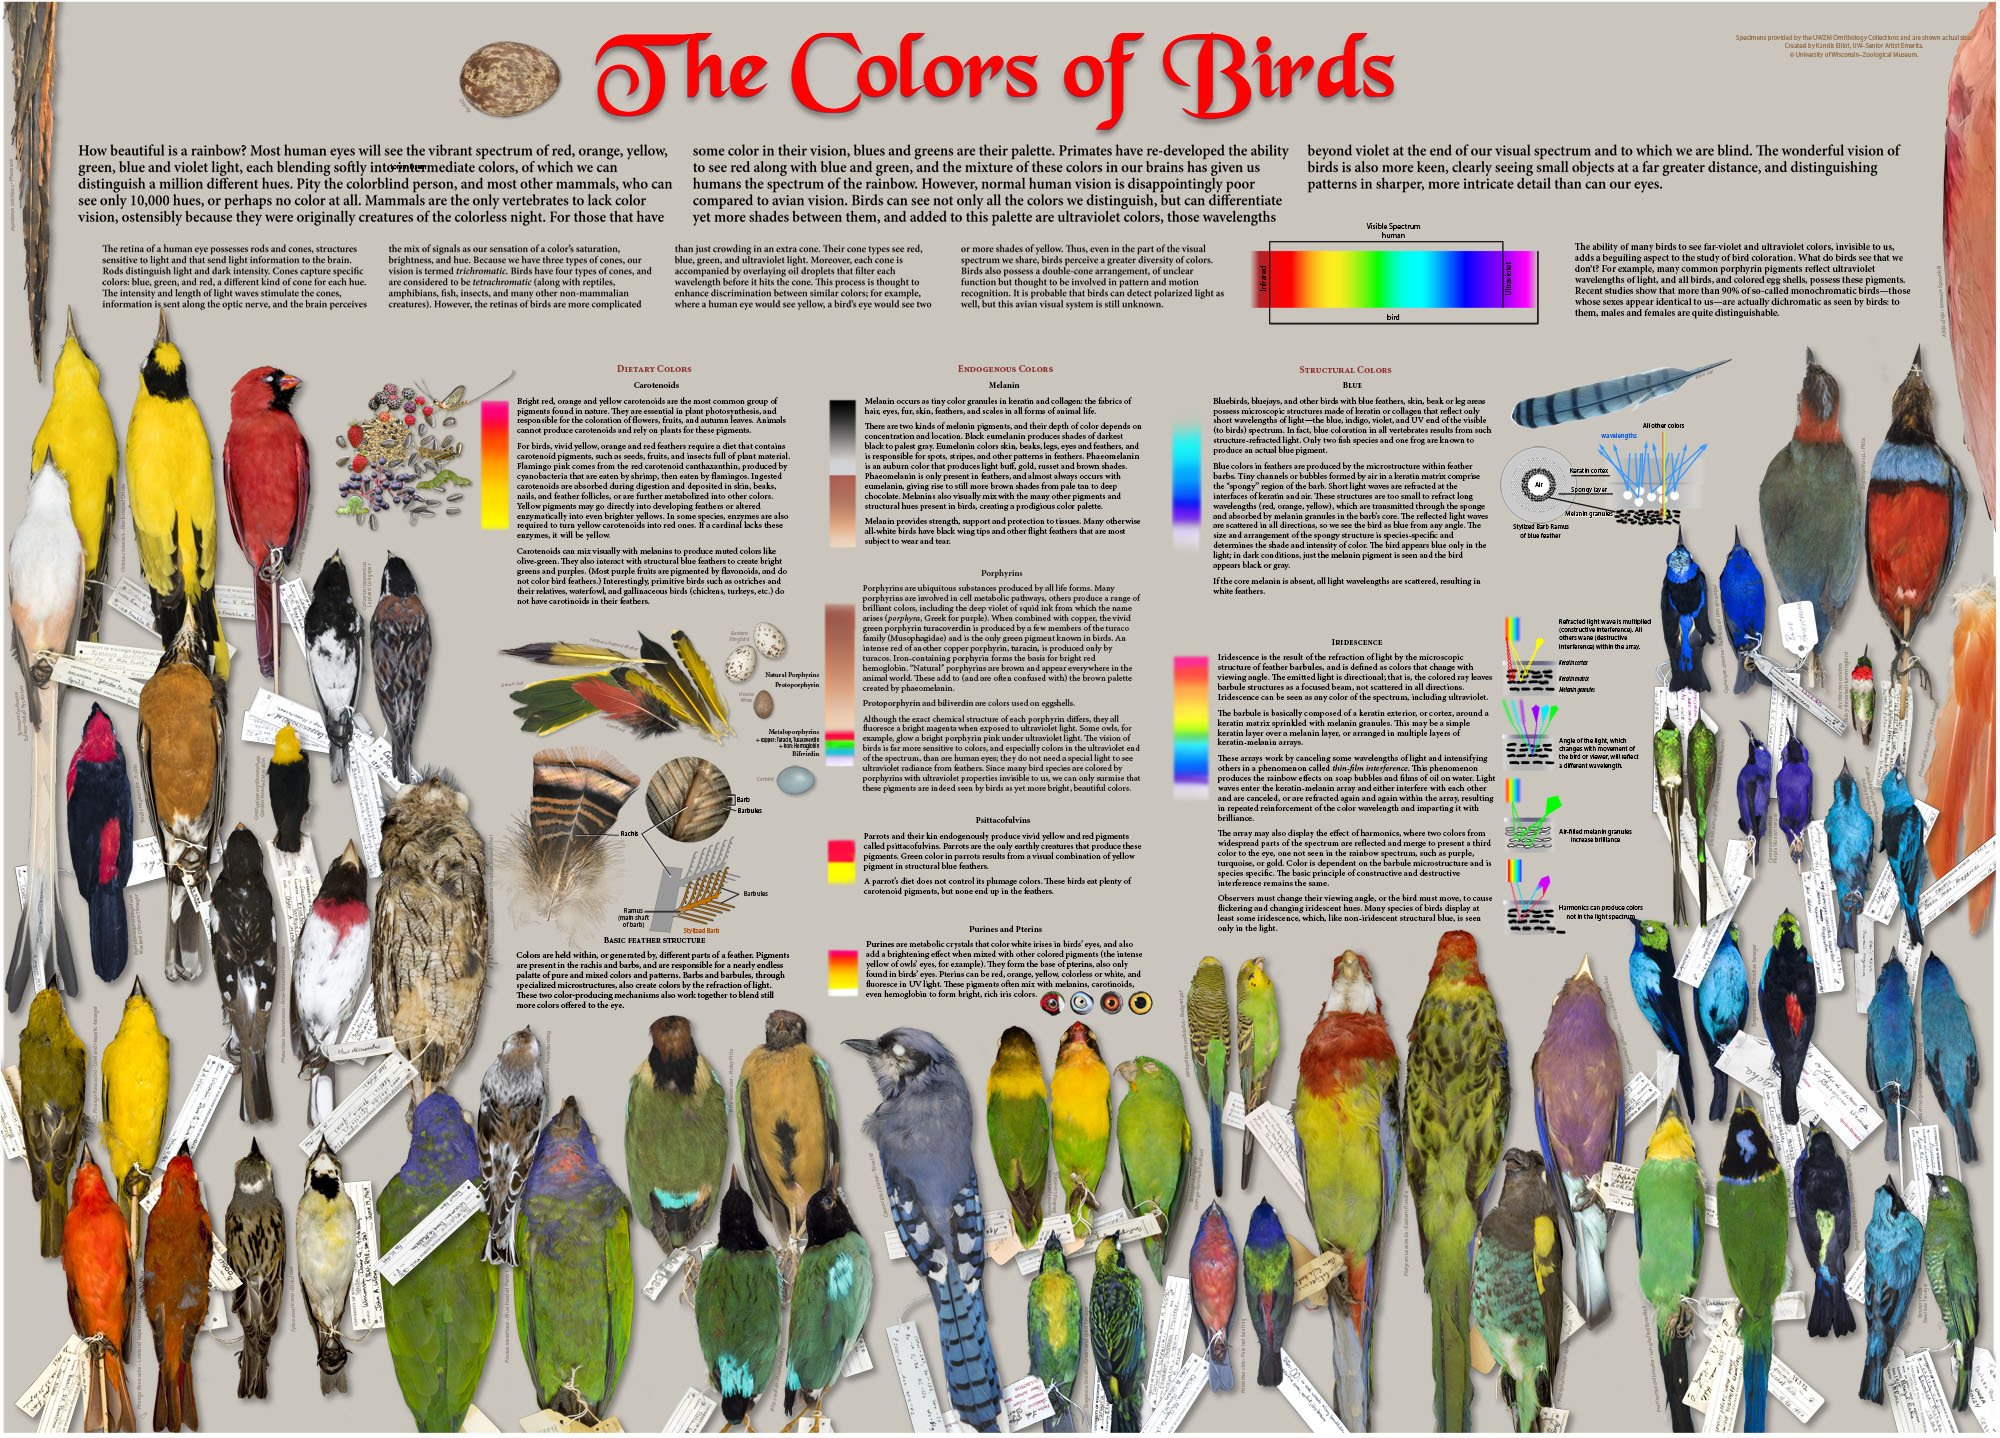 The Colors of Birds